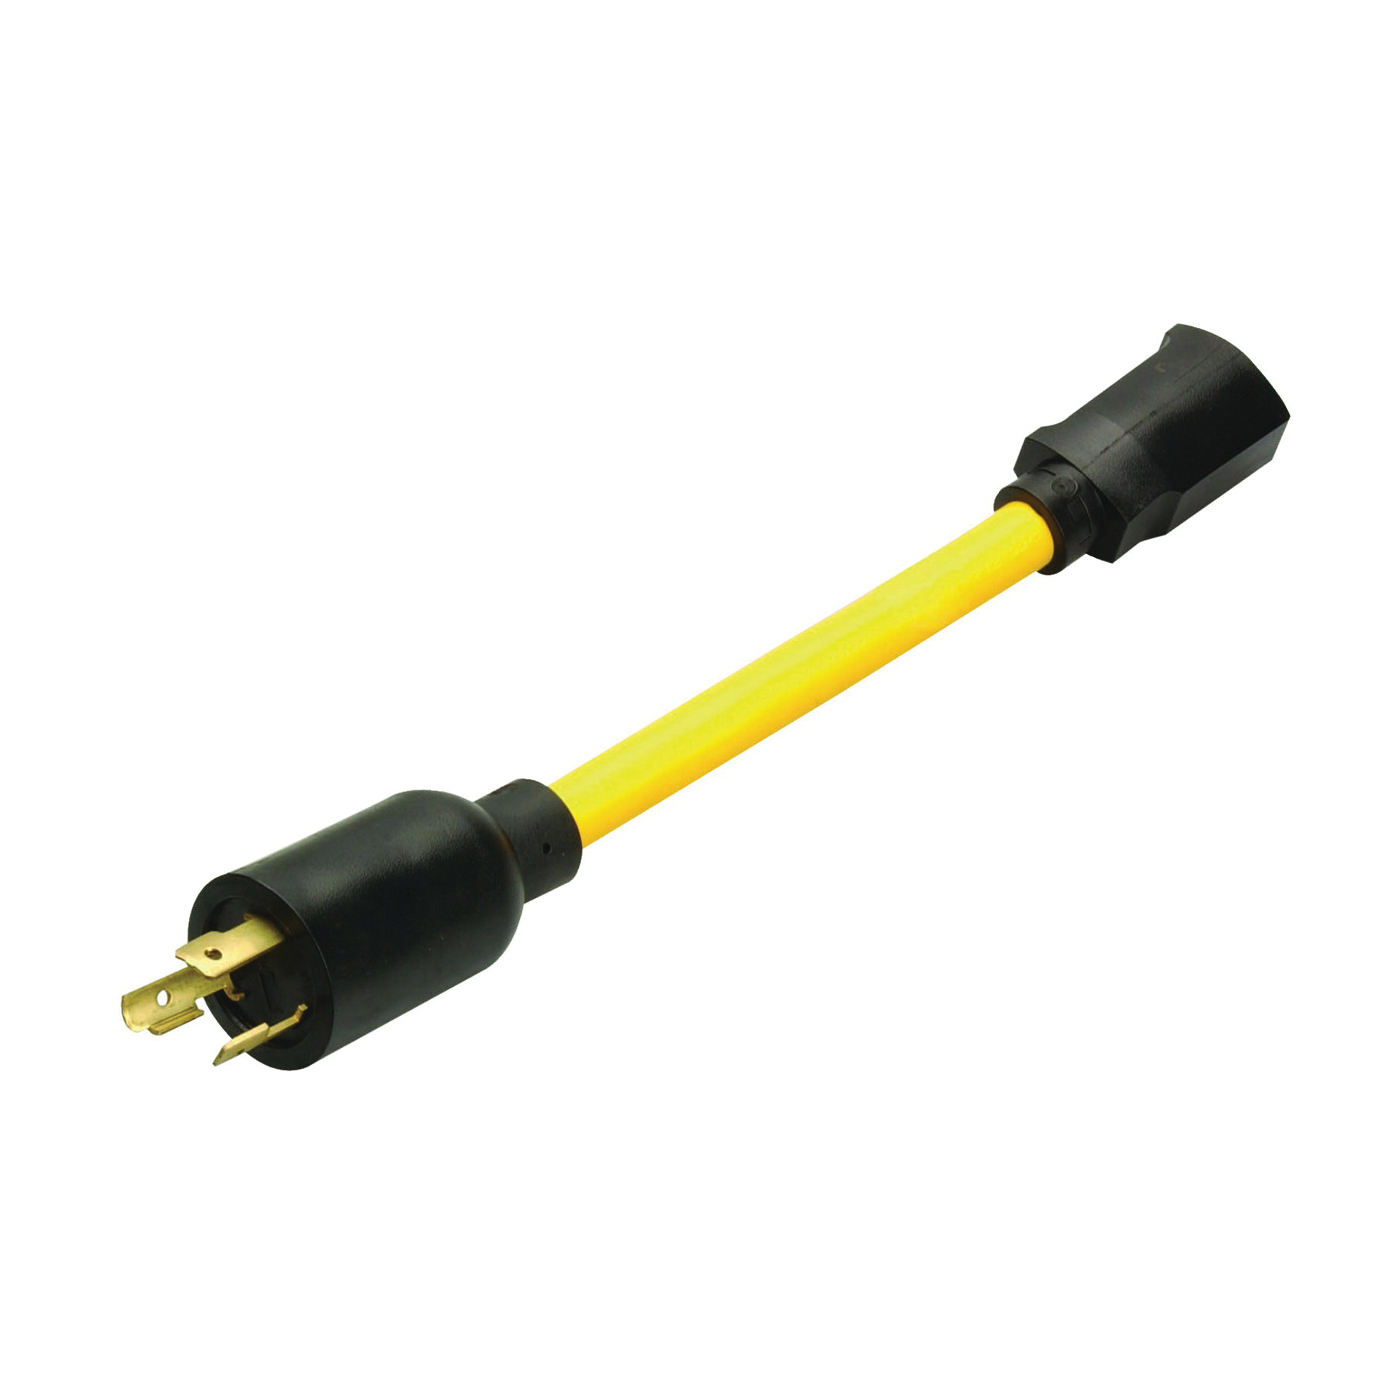 090218802 Plug Adapter, 12 AWG Cable